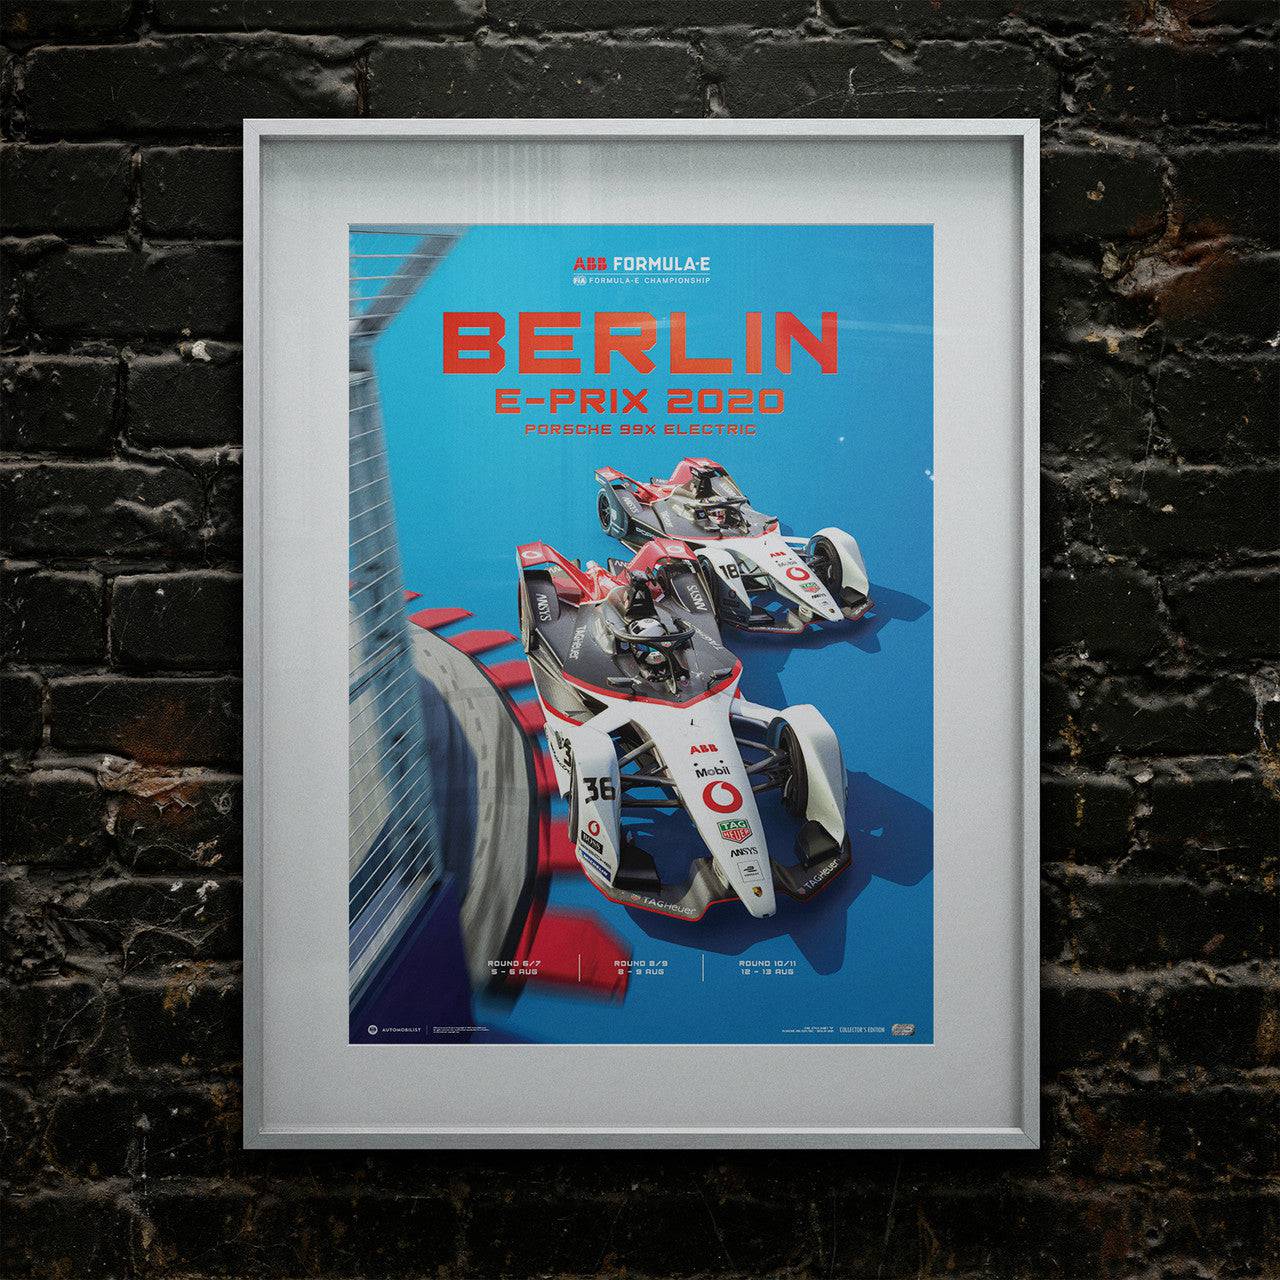 Porsche - The Past and Future - 8 Posters - Bundle | Collector's Editions